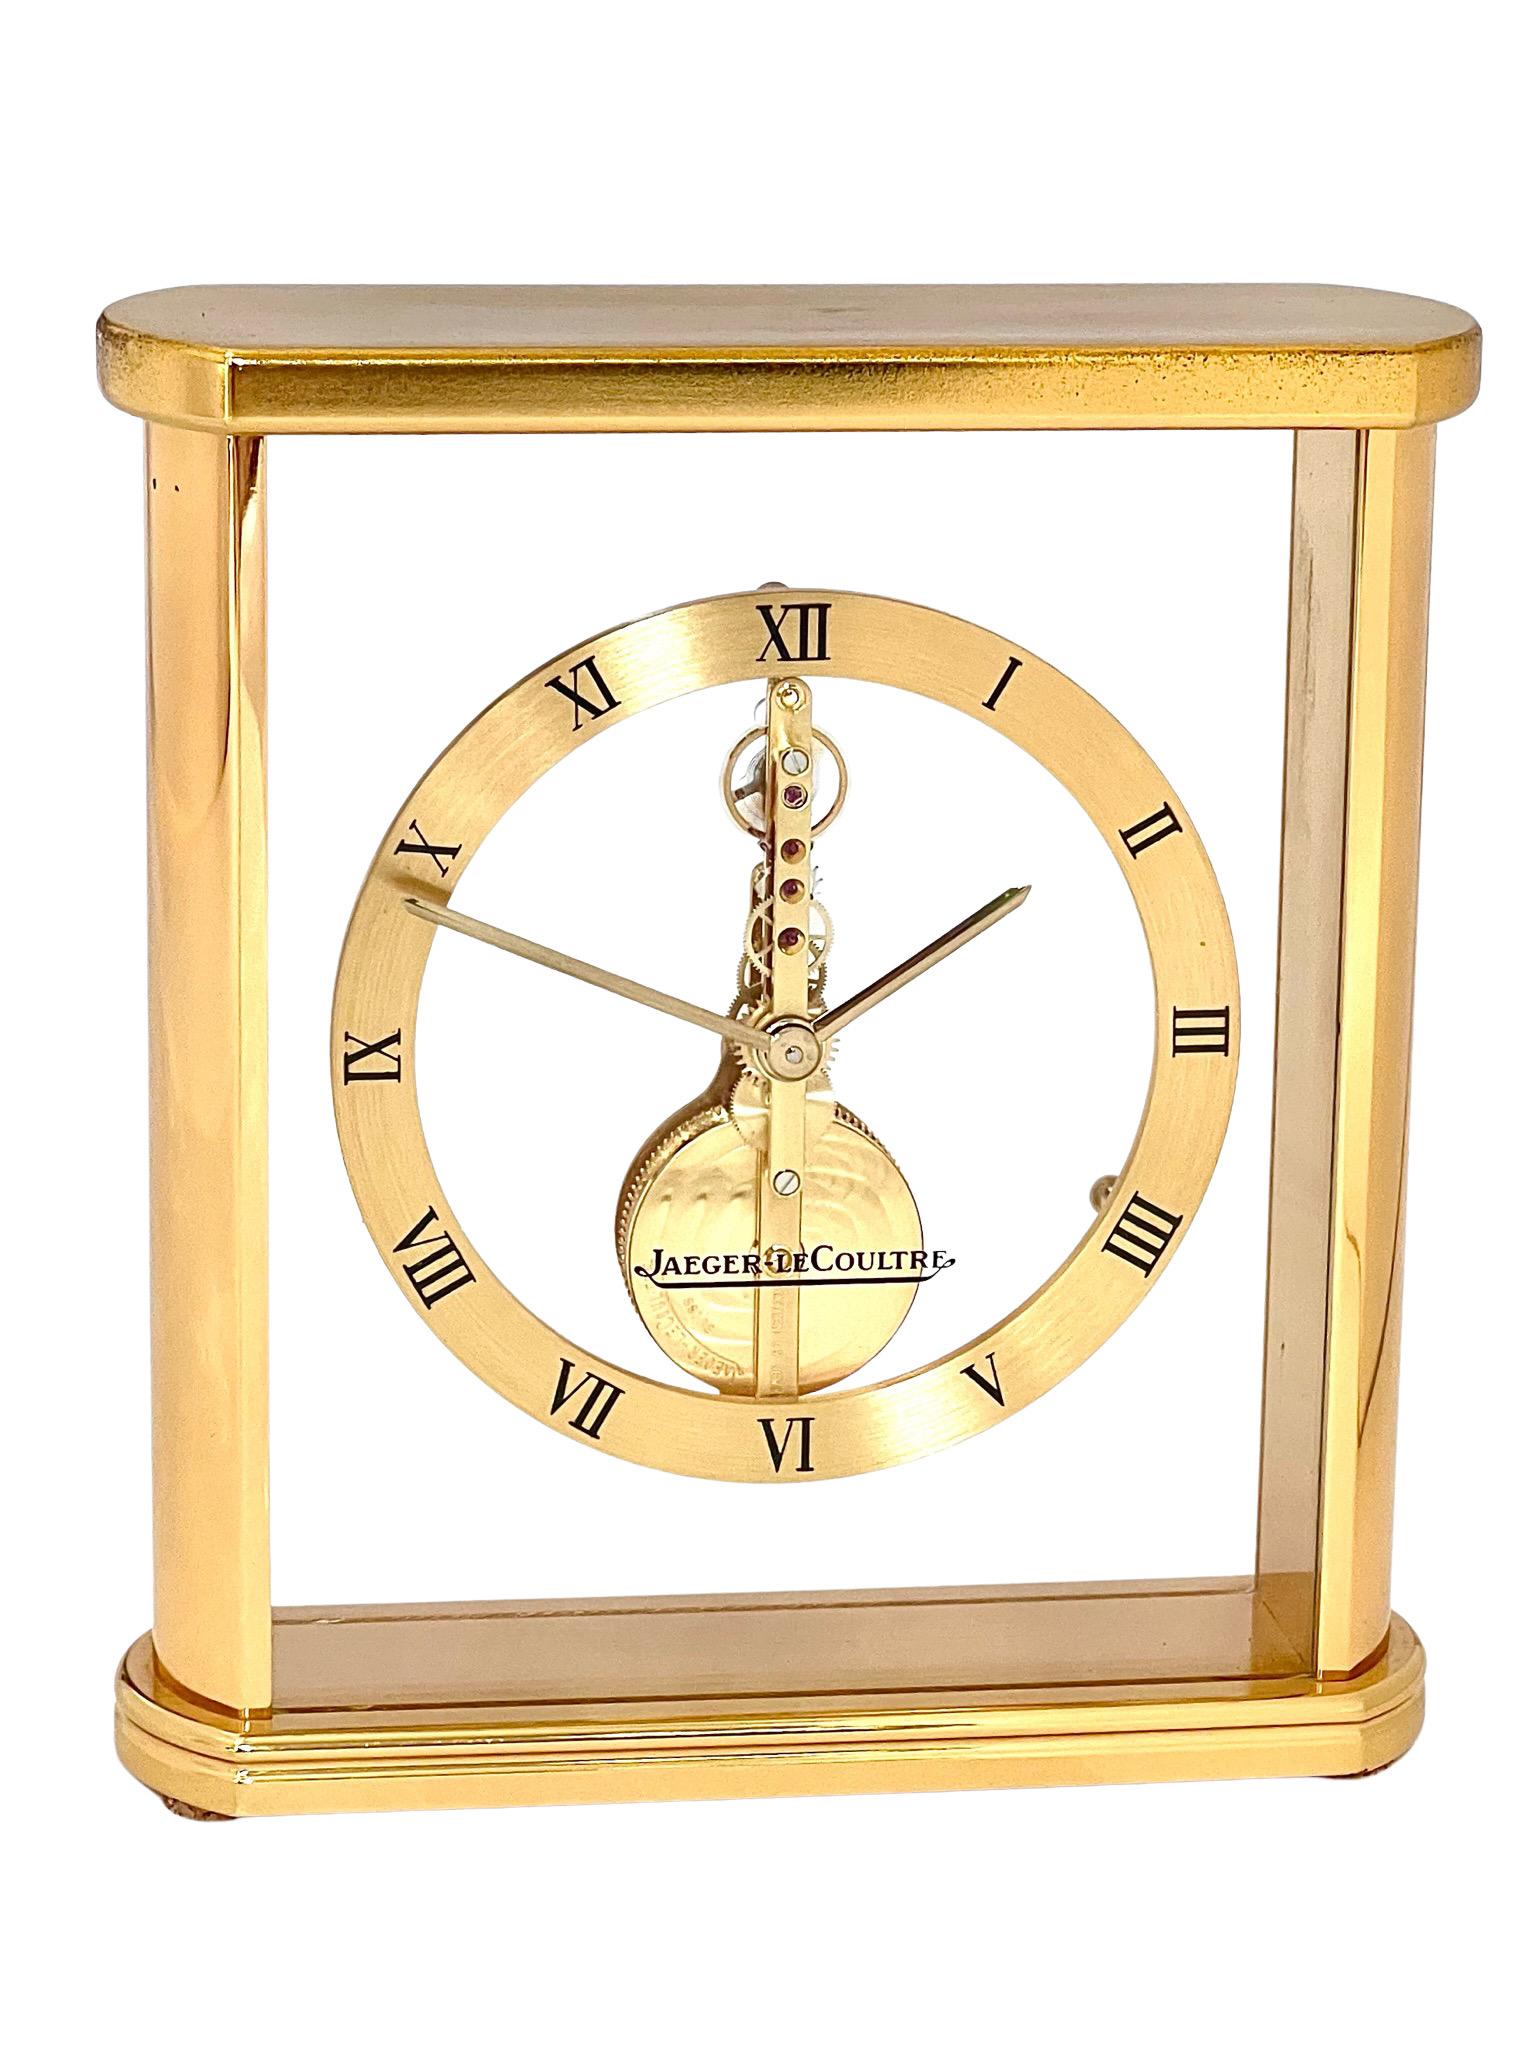 A stylish brass and glass mantel clock by Jaeger LeCoultre, with a floating Baguette movement set in a rectangular glass and polished brass case. 

Jaeger reference is 215.023. The logo is visible and lends a stylish aesthetic to the clock. The